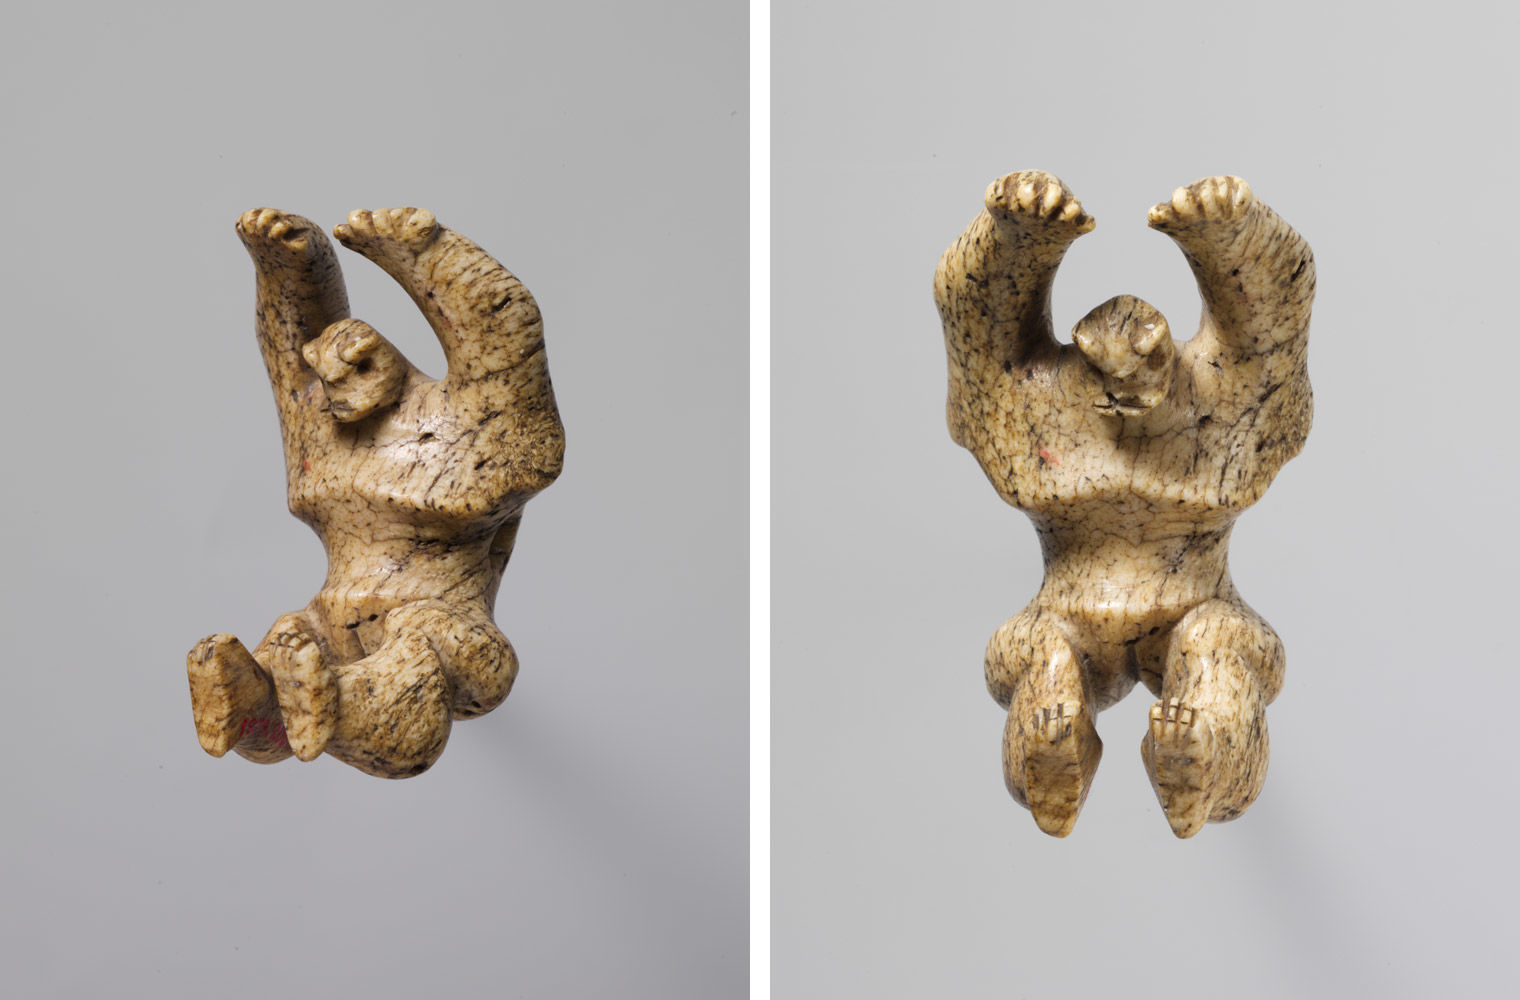 Two views of a whalebone pendant from Hawai'i